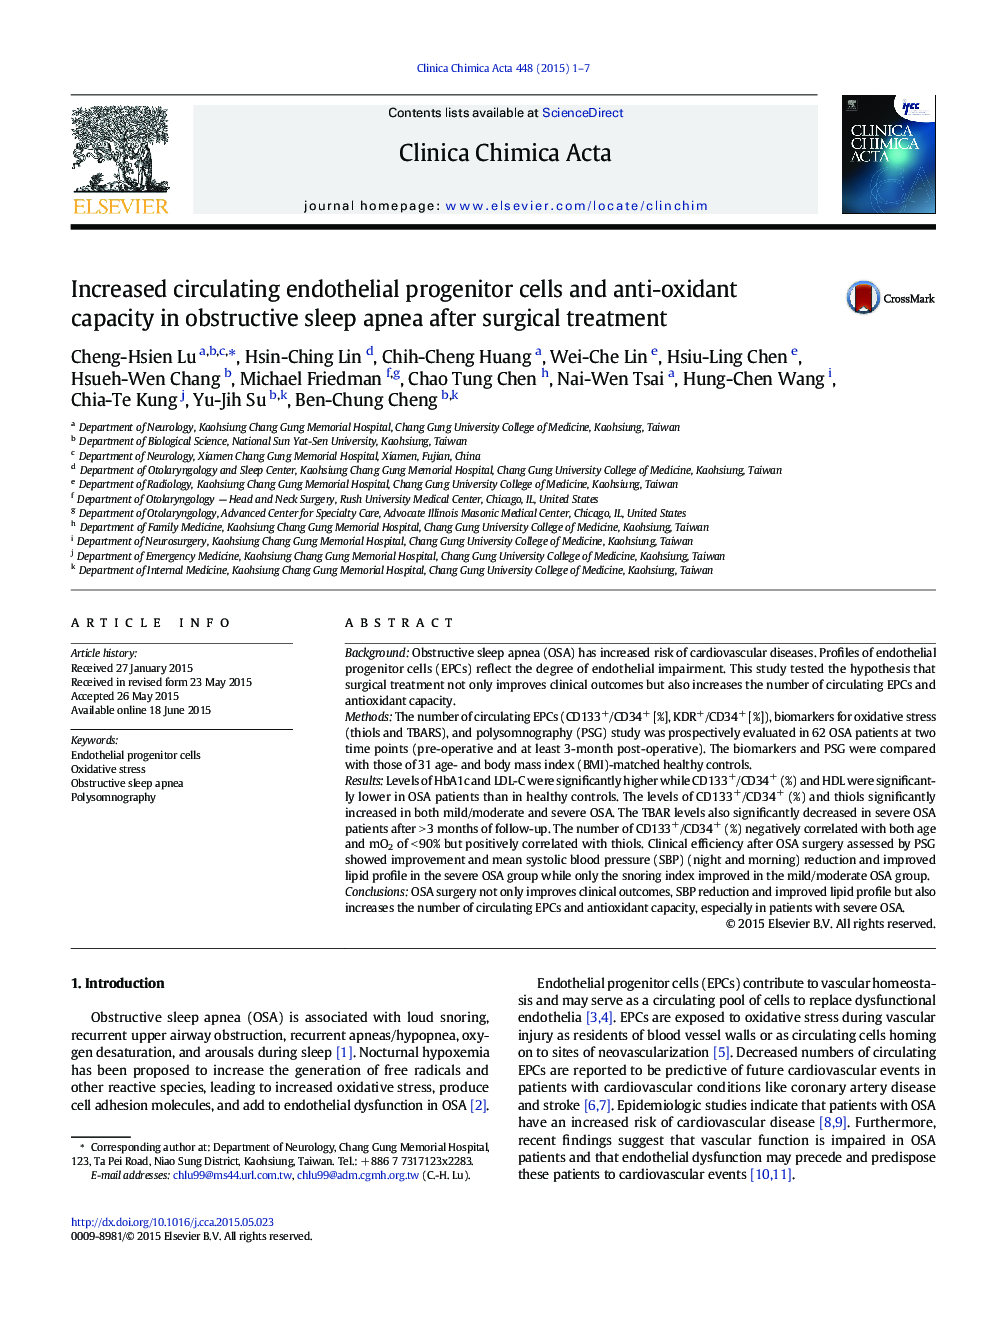 Increased circulating endothelial progenitor cells and anti-oxidant capacity in obstructive sleep apnea after surgical treatment